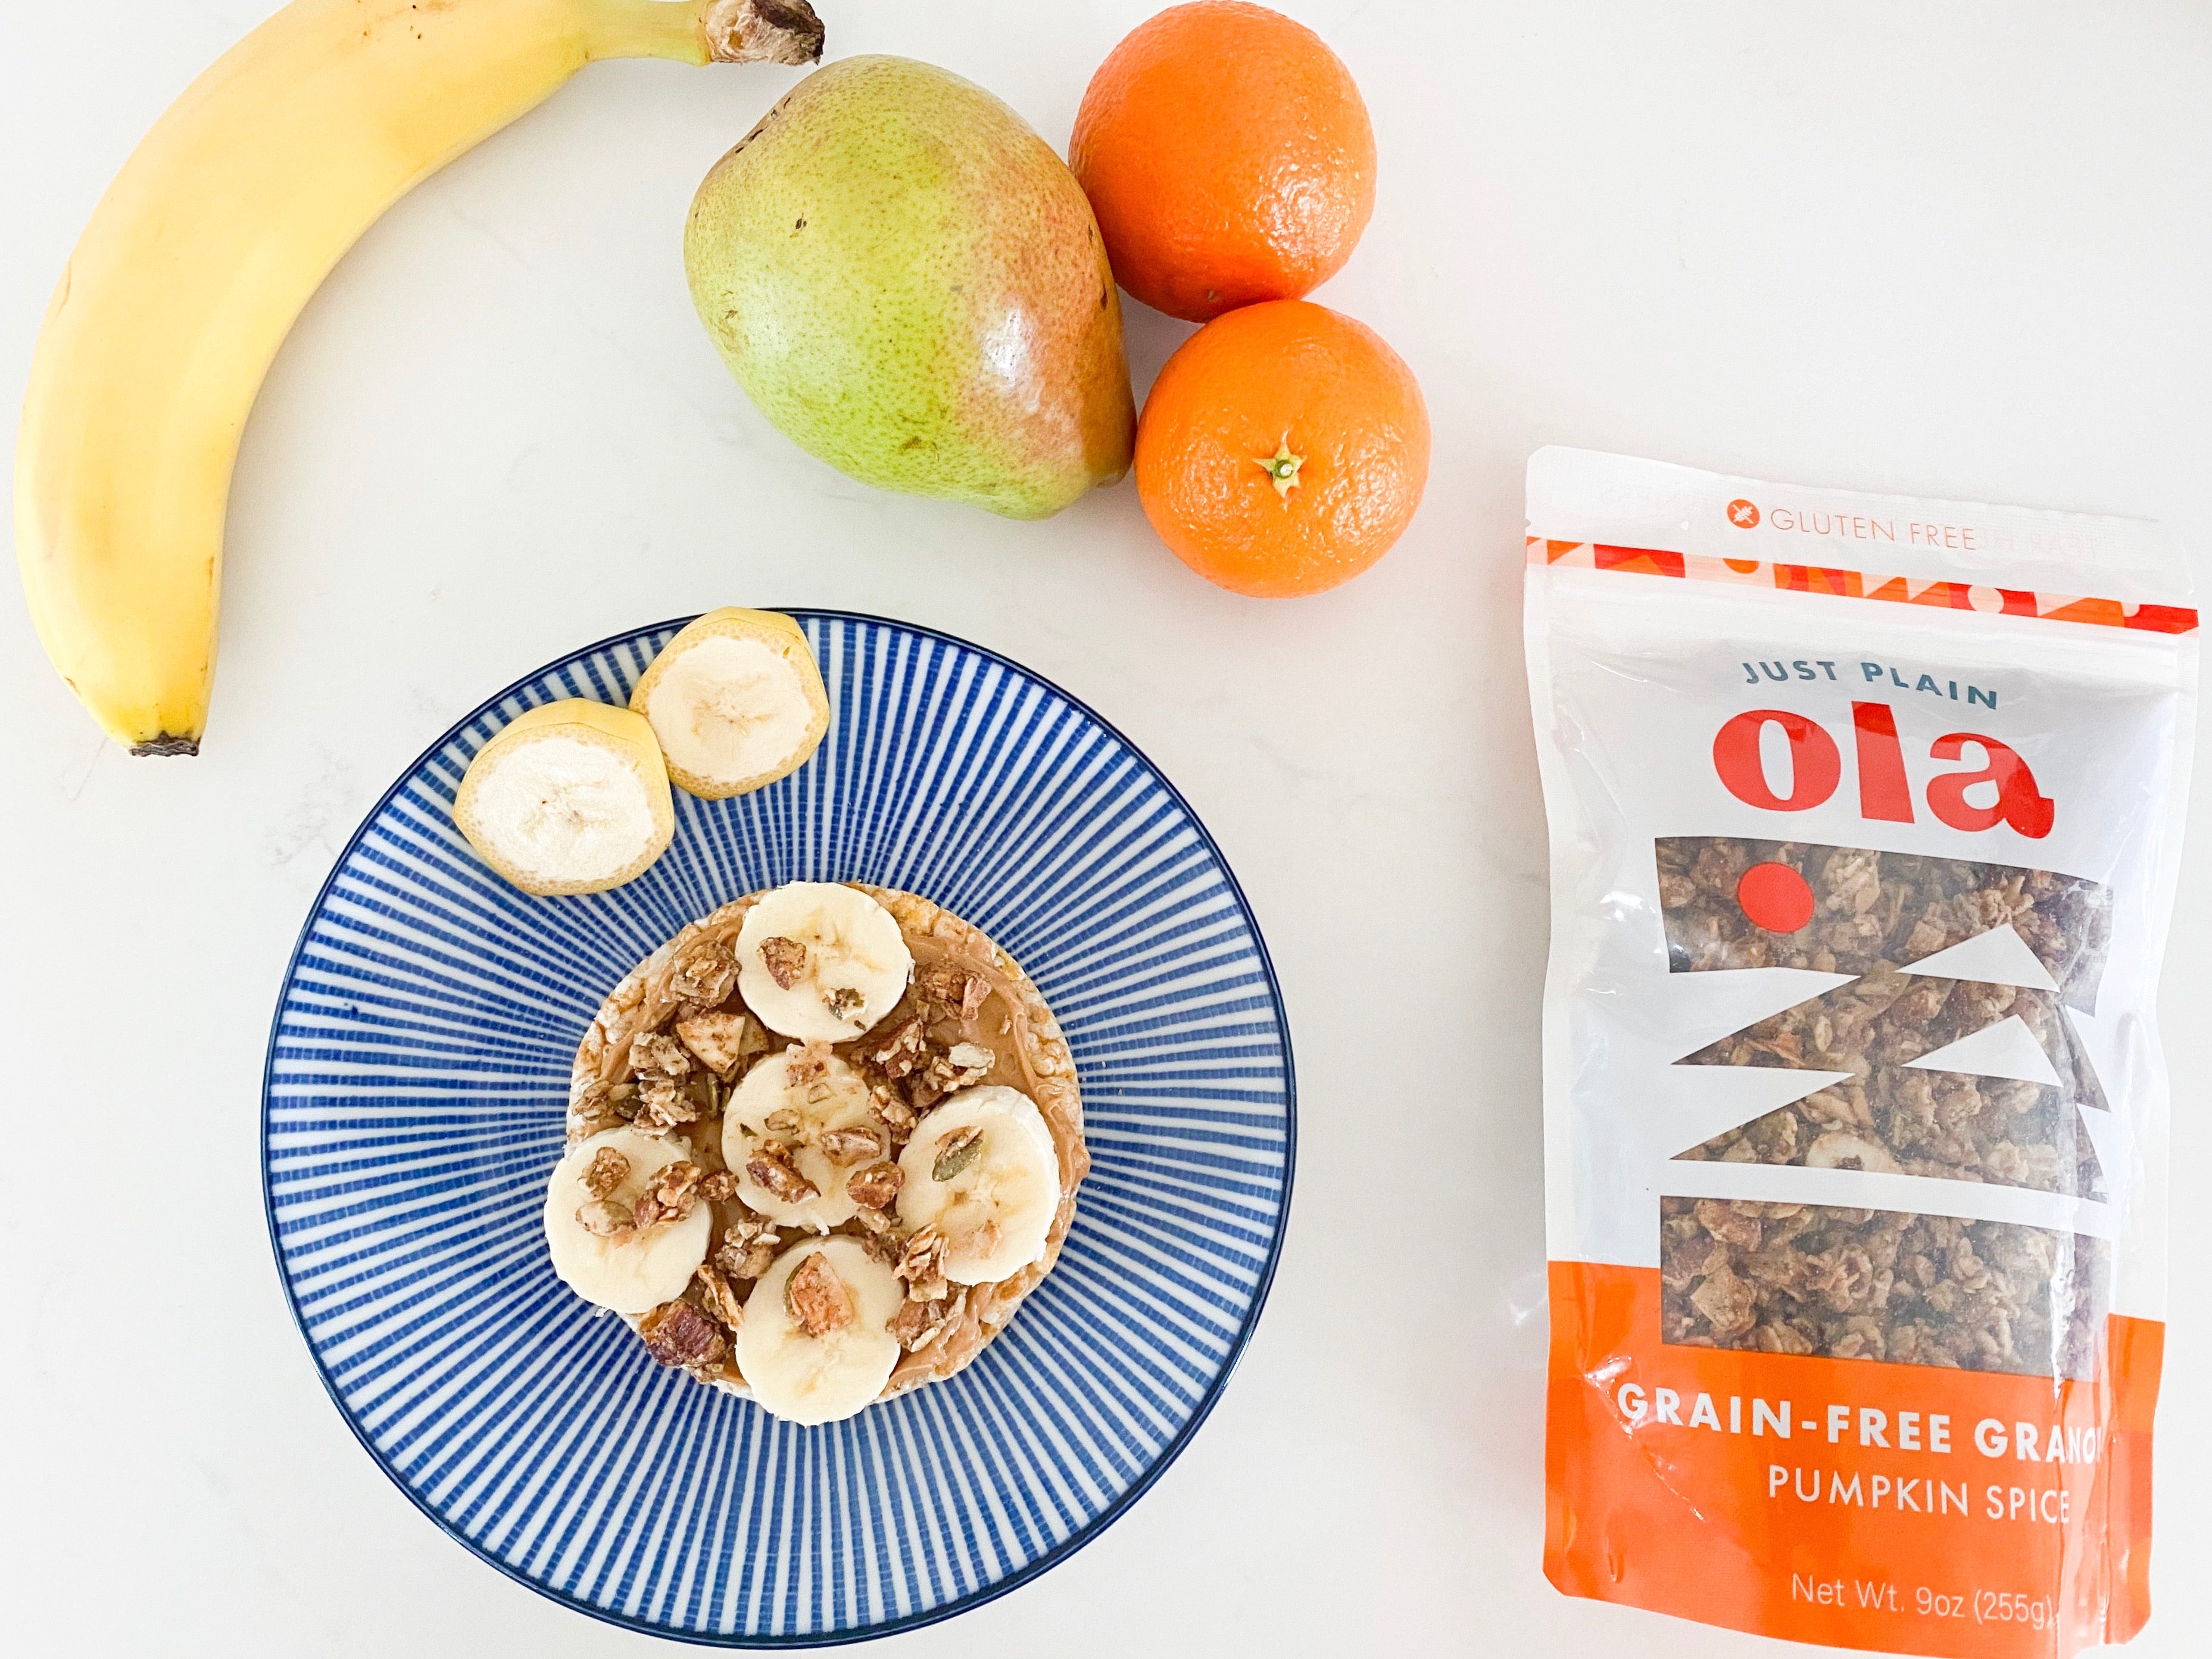 A peanut butter banana snack topped with pumpkin spice Just Plain Ola.